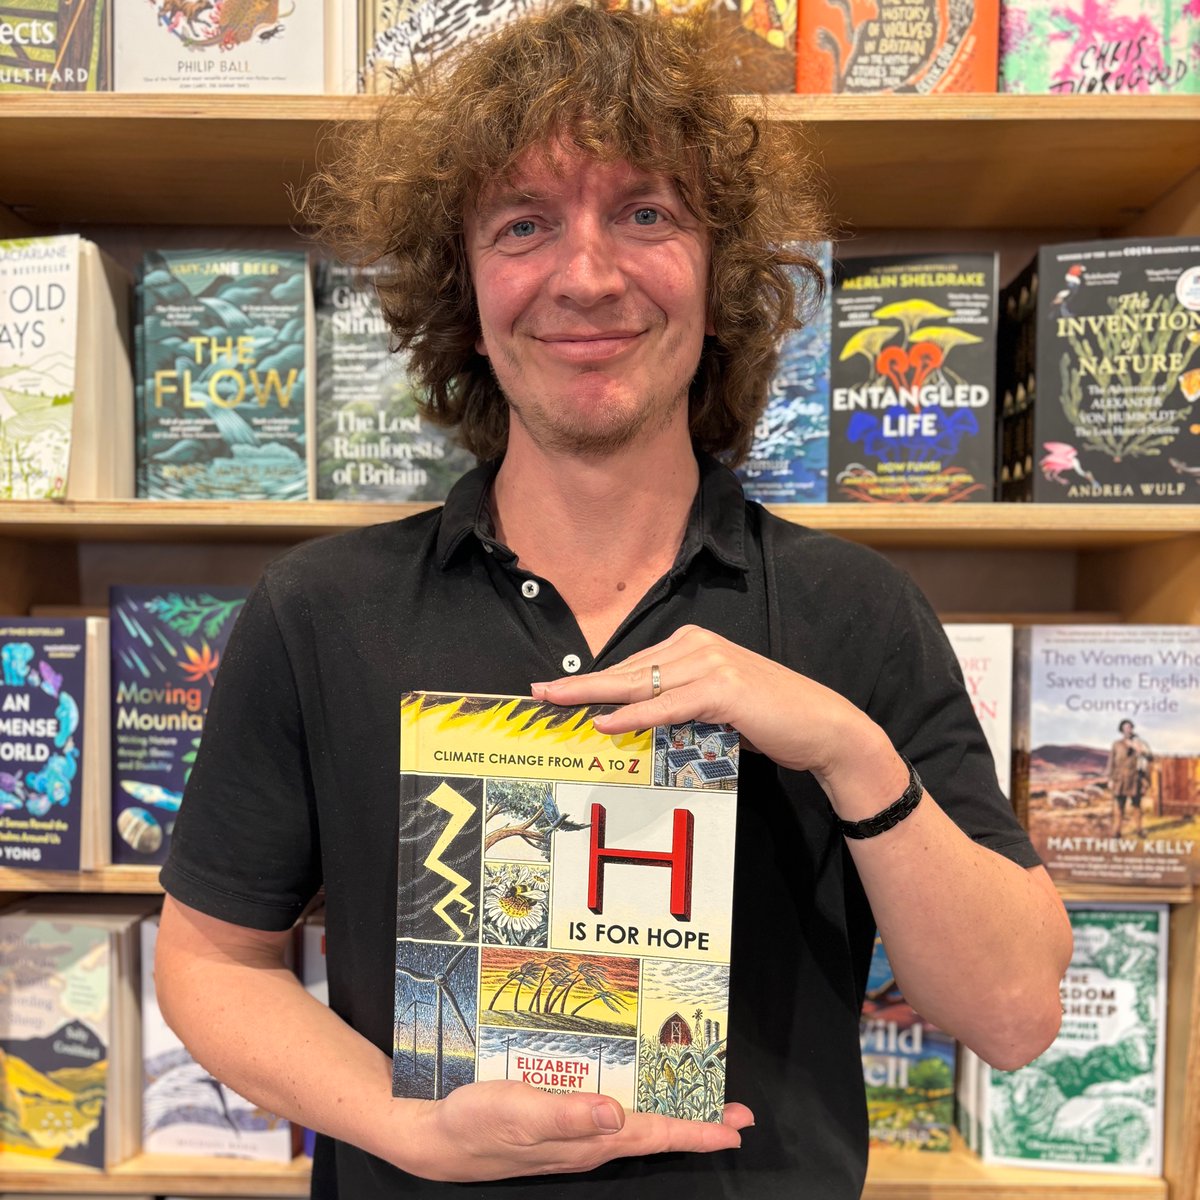 Diego picked H is for Hope by Elisabeth Kolbert @ElizKolbert “A refreshing and thought-provoking book that doesn’t shy away from the obvious. A fun and entertaining approach on an often overly wordy topic.” stanfords.co.uk/h-is-for-hope-…